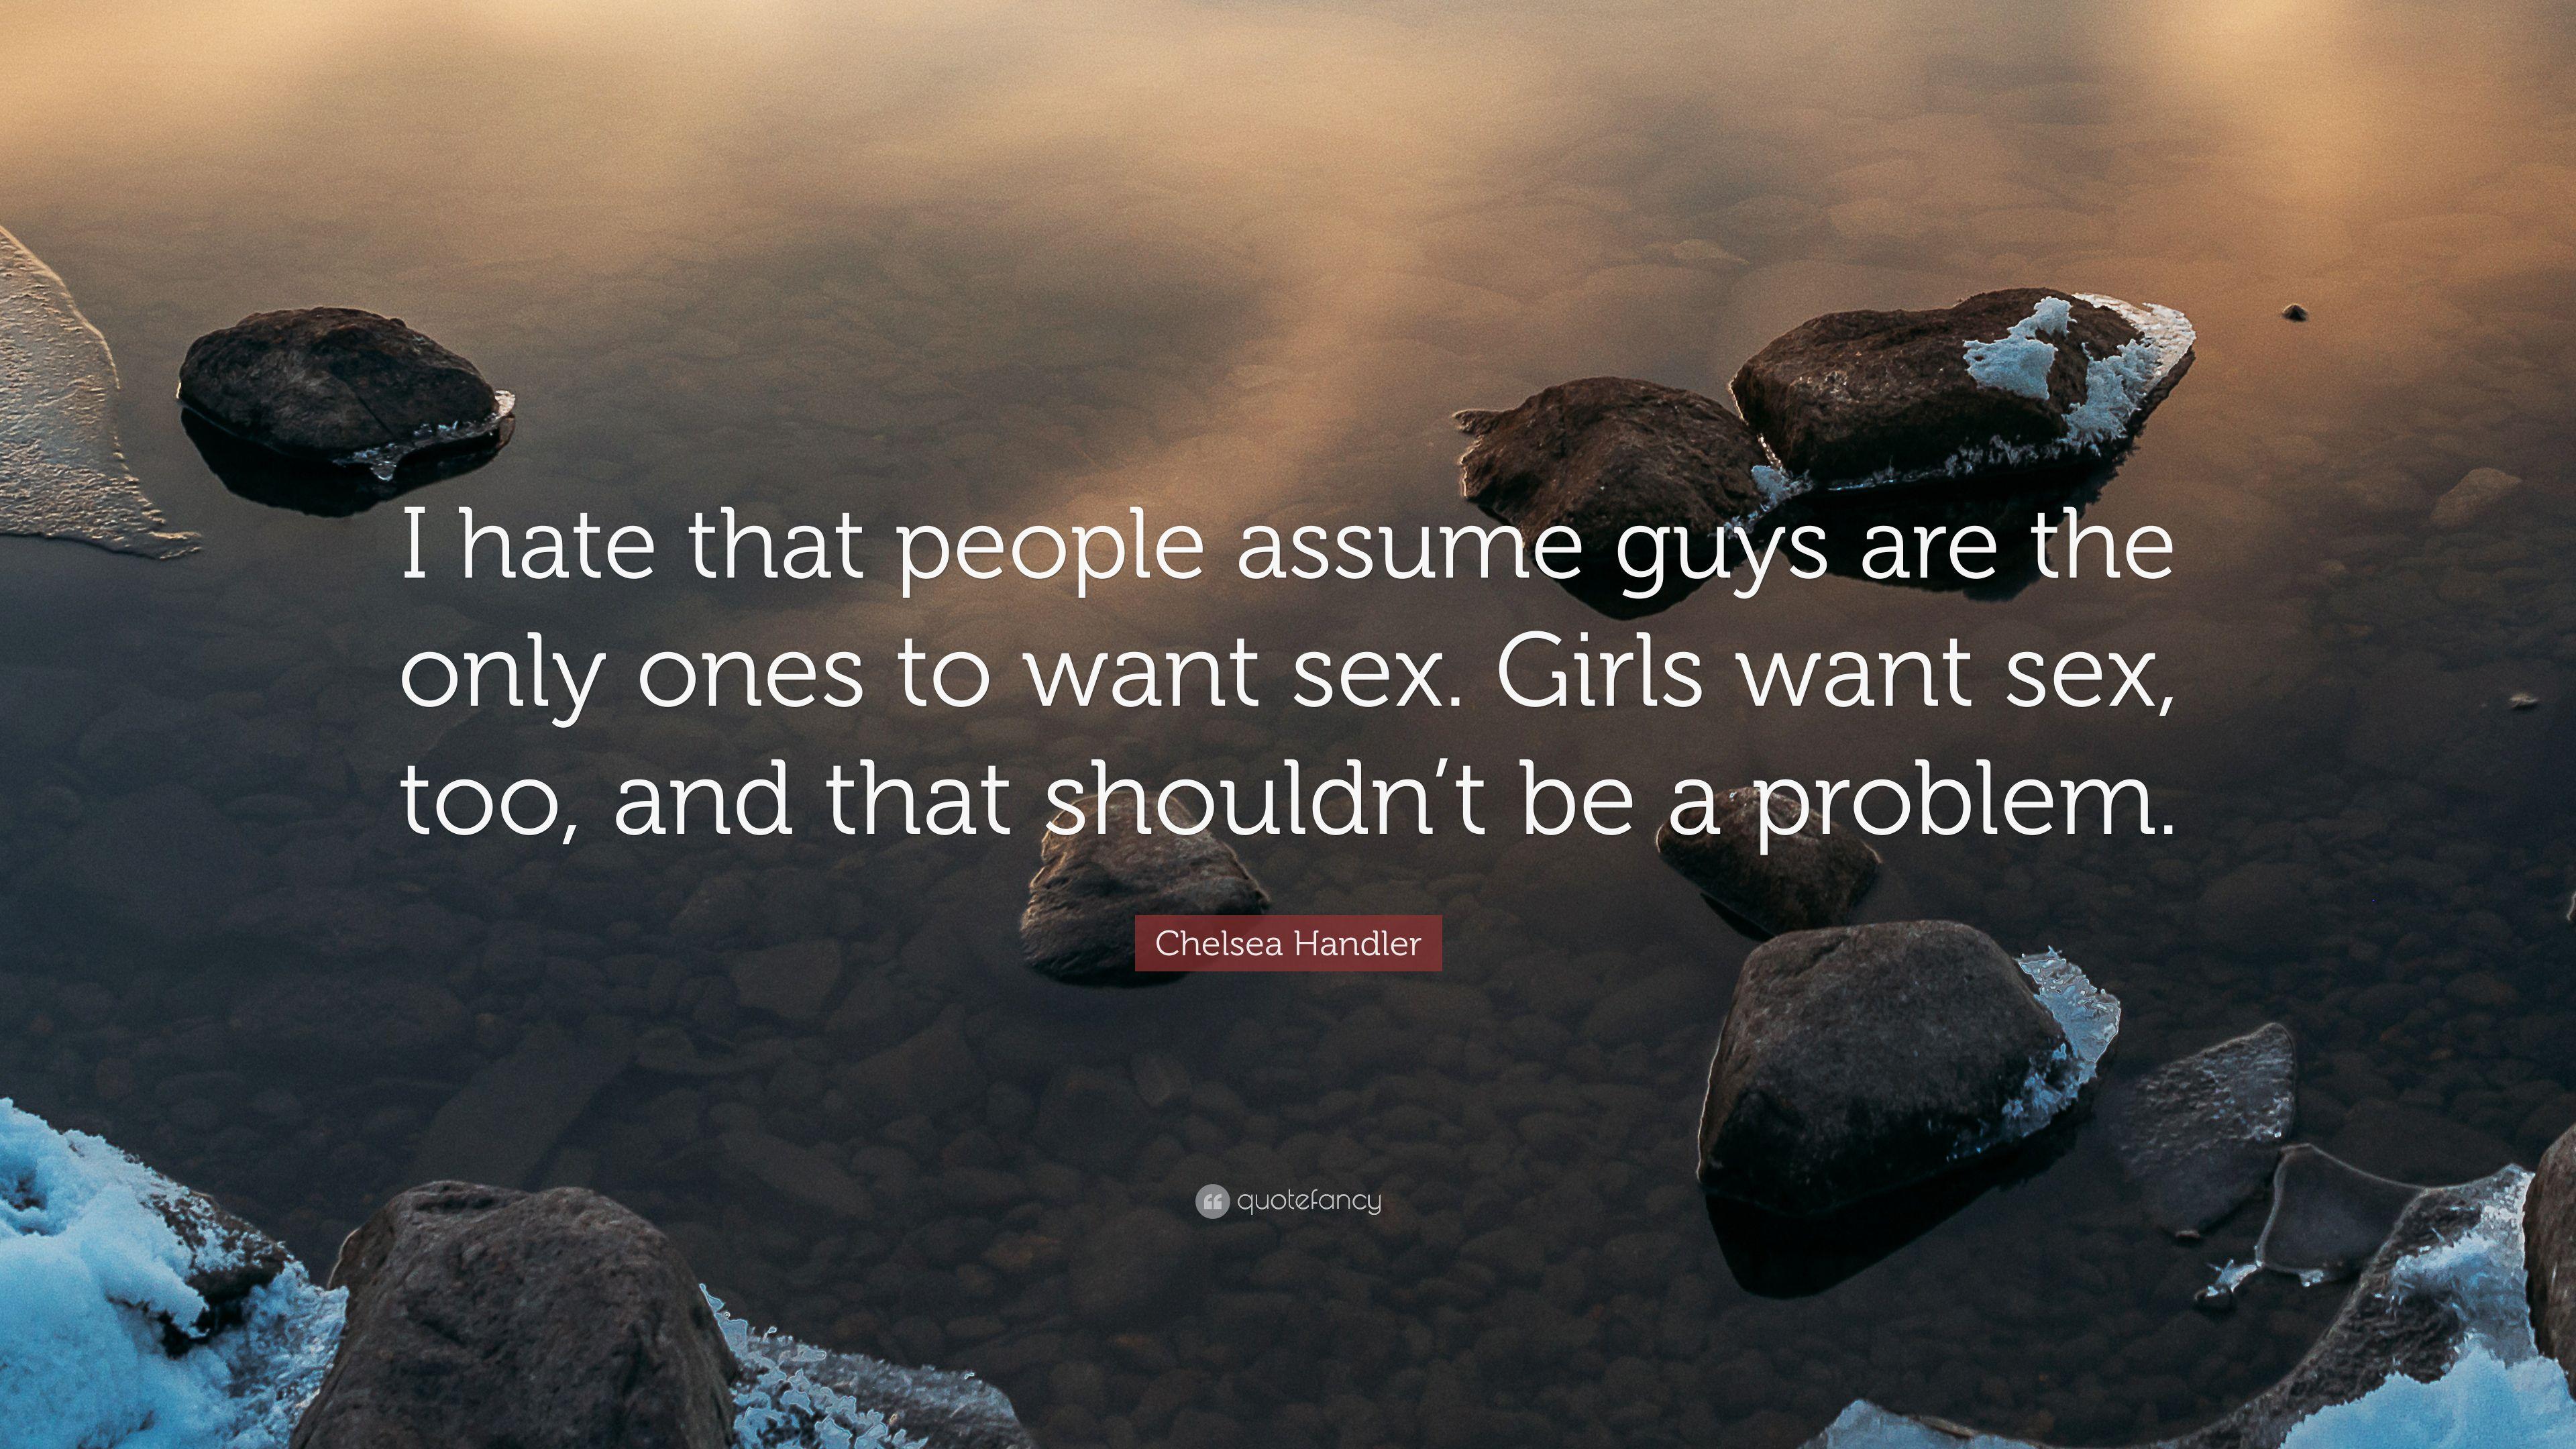 Chelsea Handler Quote: “I hate that people assume guys are